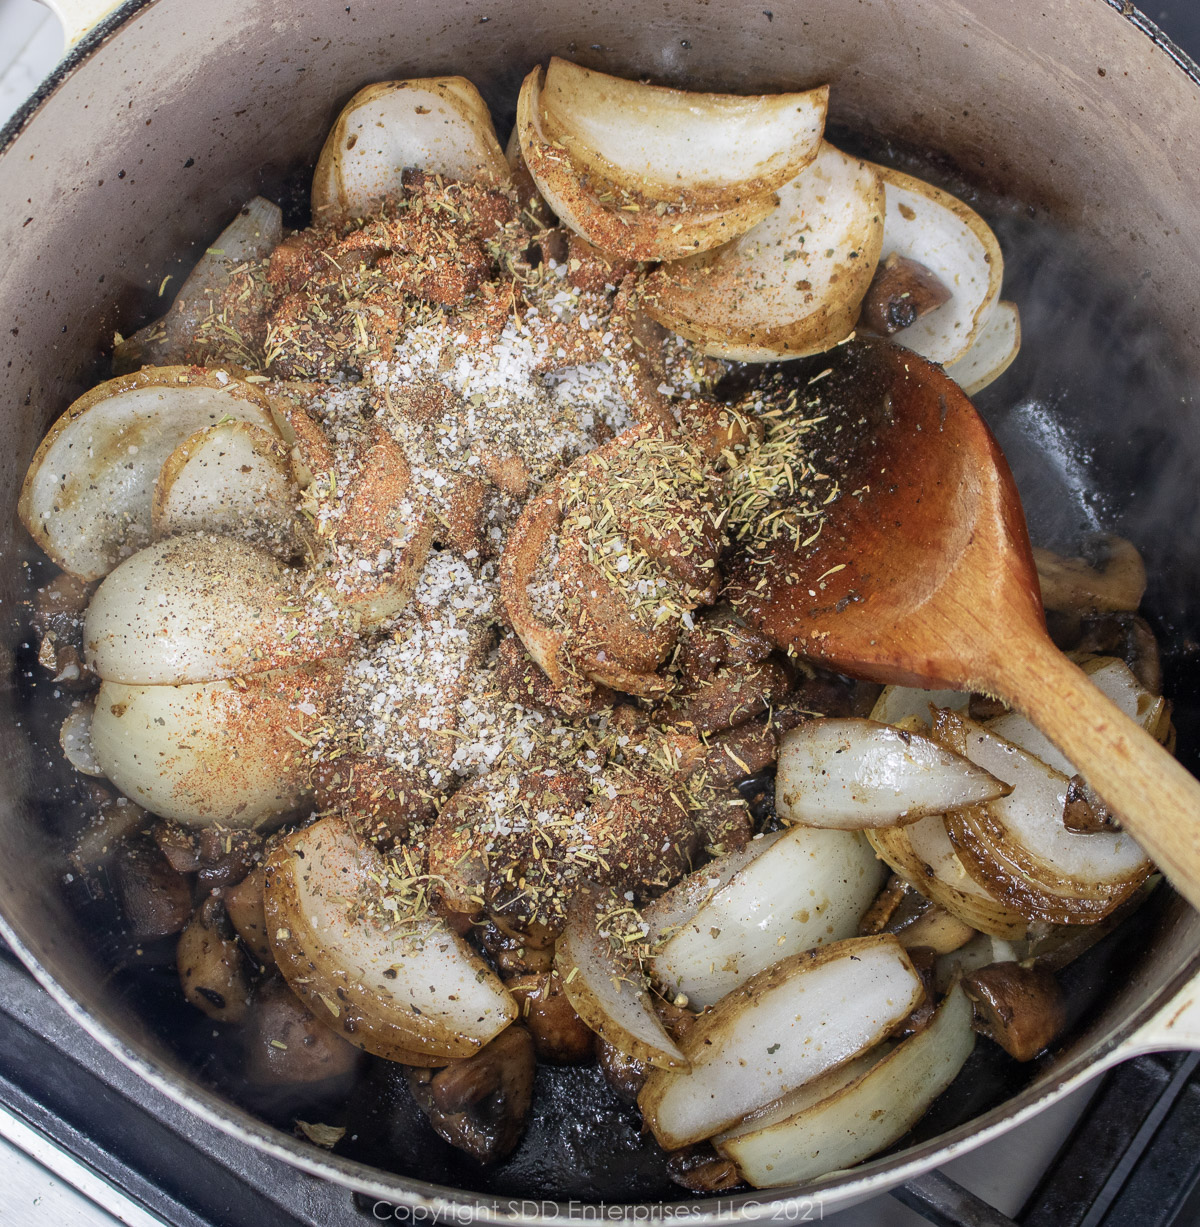 garlic and herbs added to onions and mushrooms in a Dutch oven